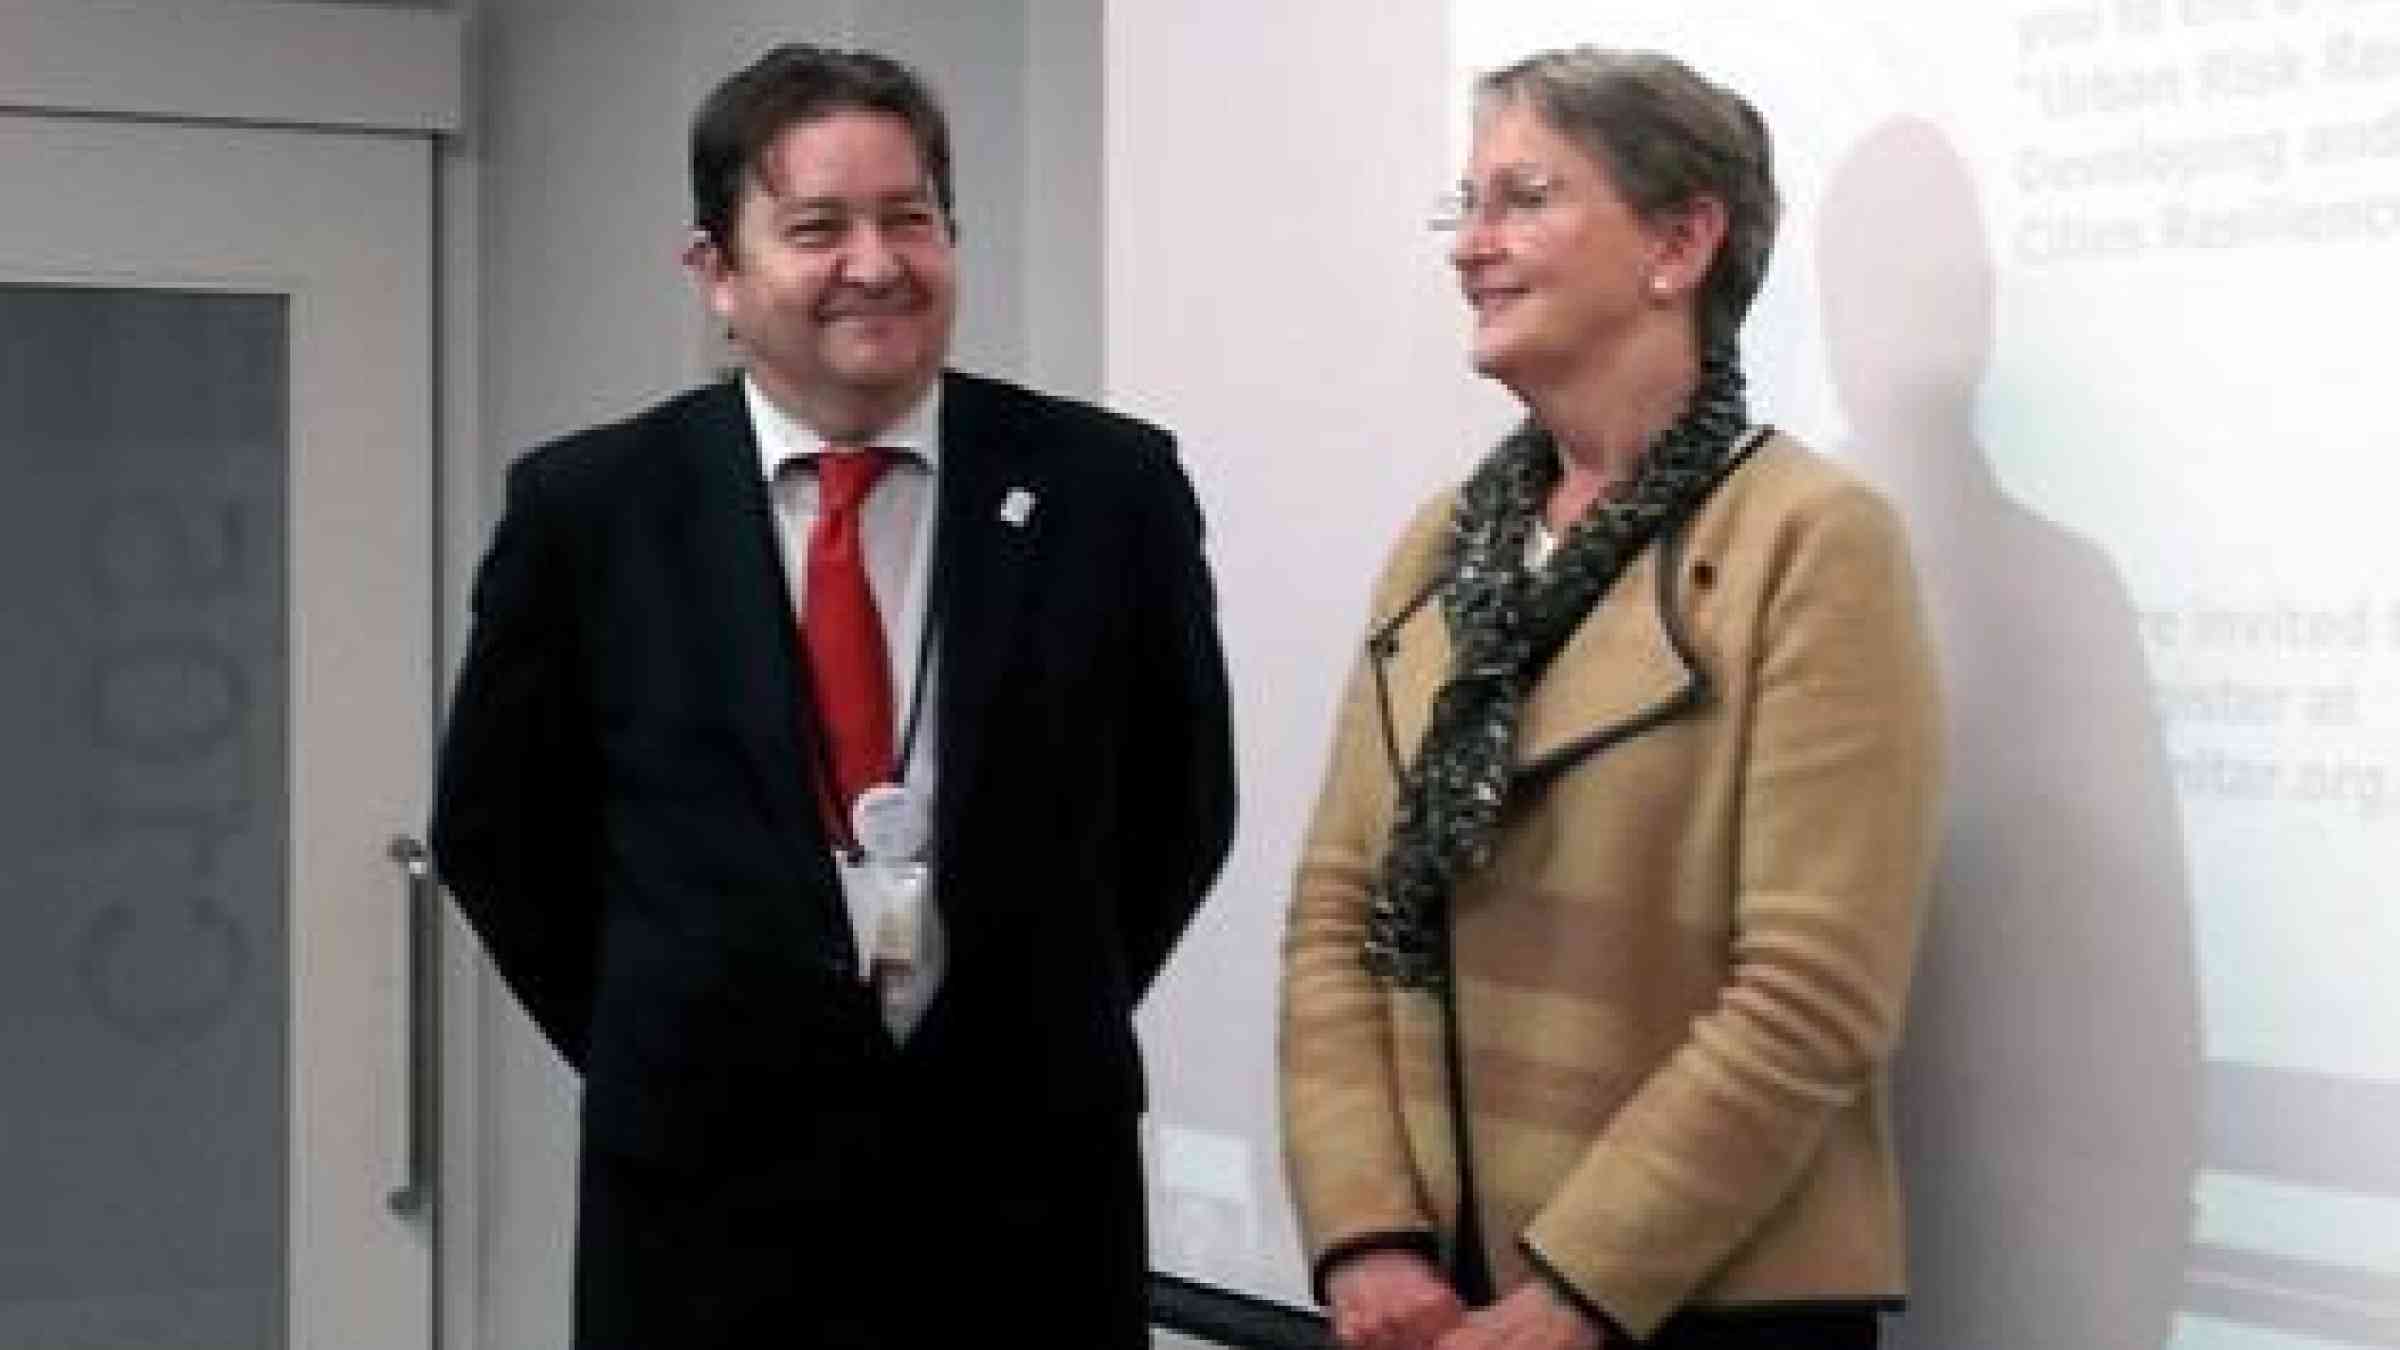 Mr McFarlane (left) with Ms Fegan-Wyles at the official launch of the new E-learning course. (Photo: UNISDR)